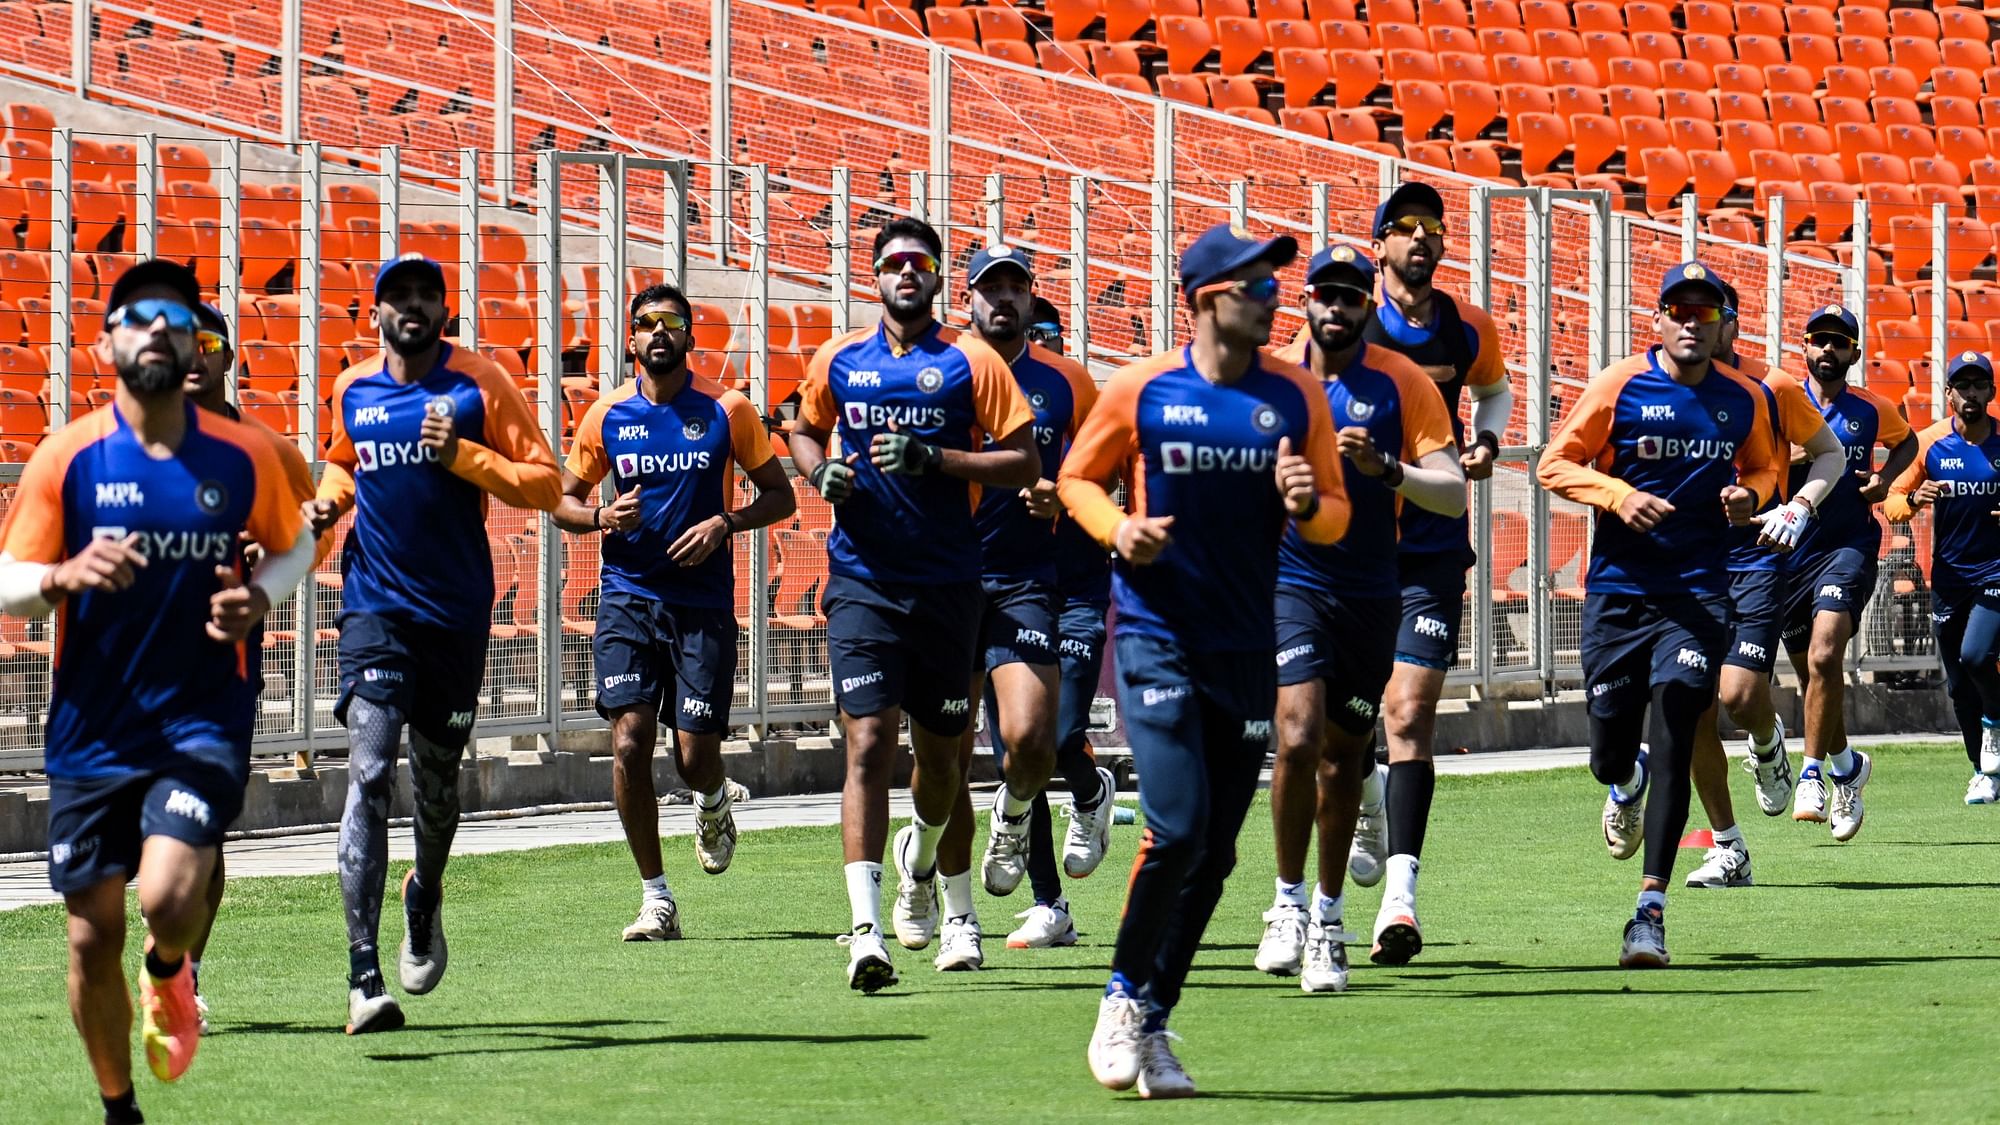 The third Test between India and England will start on Wednesday in Ahmedabad.